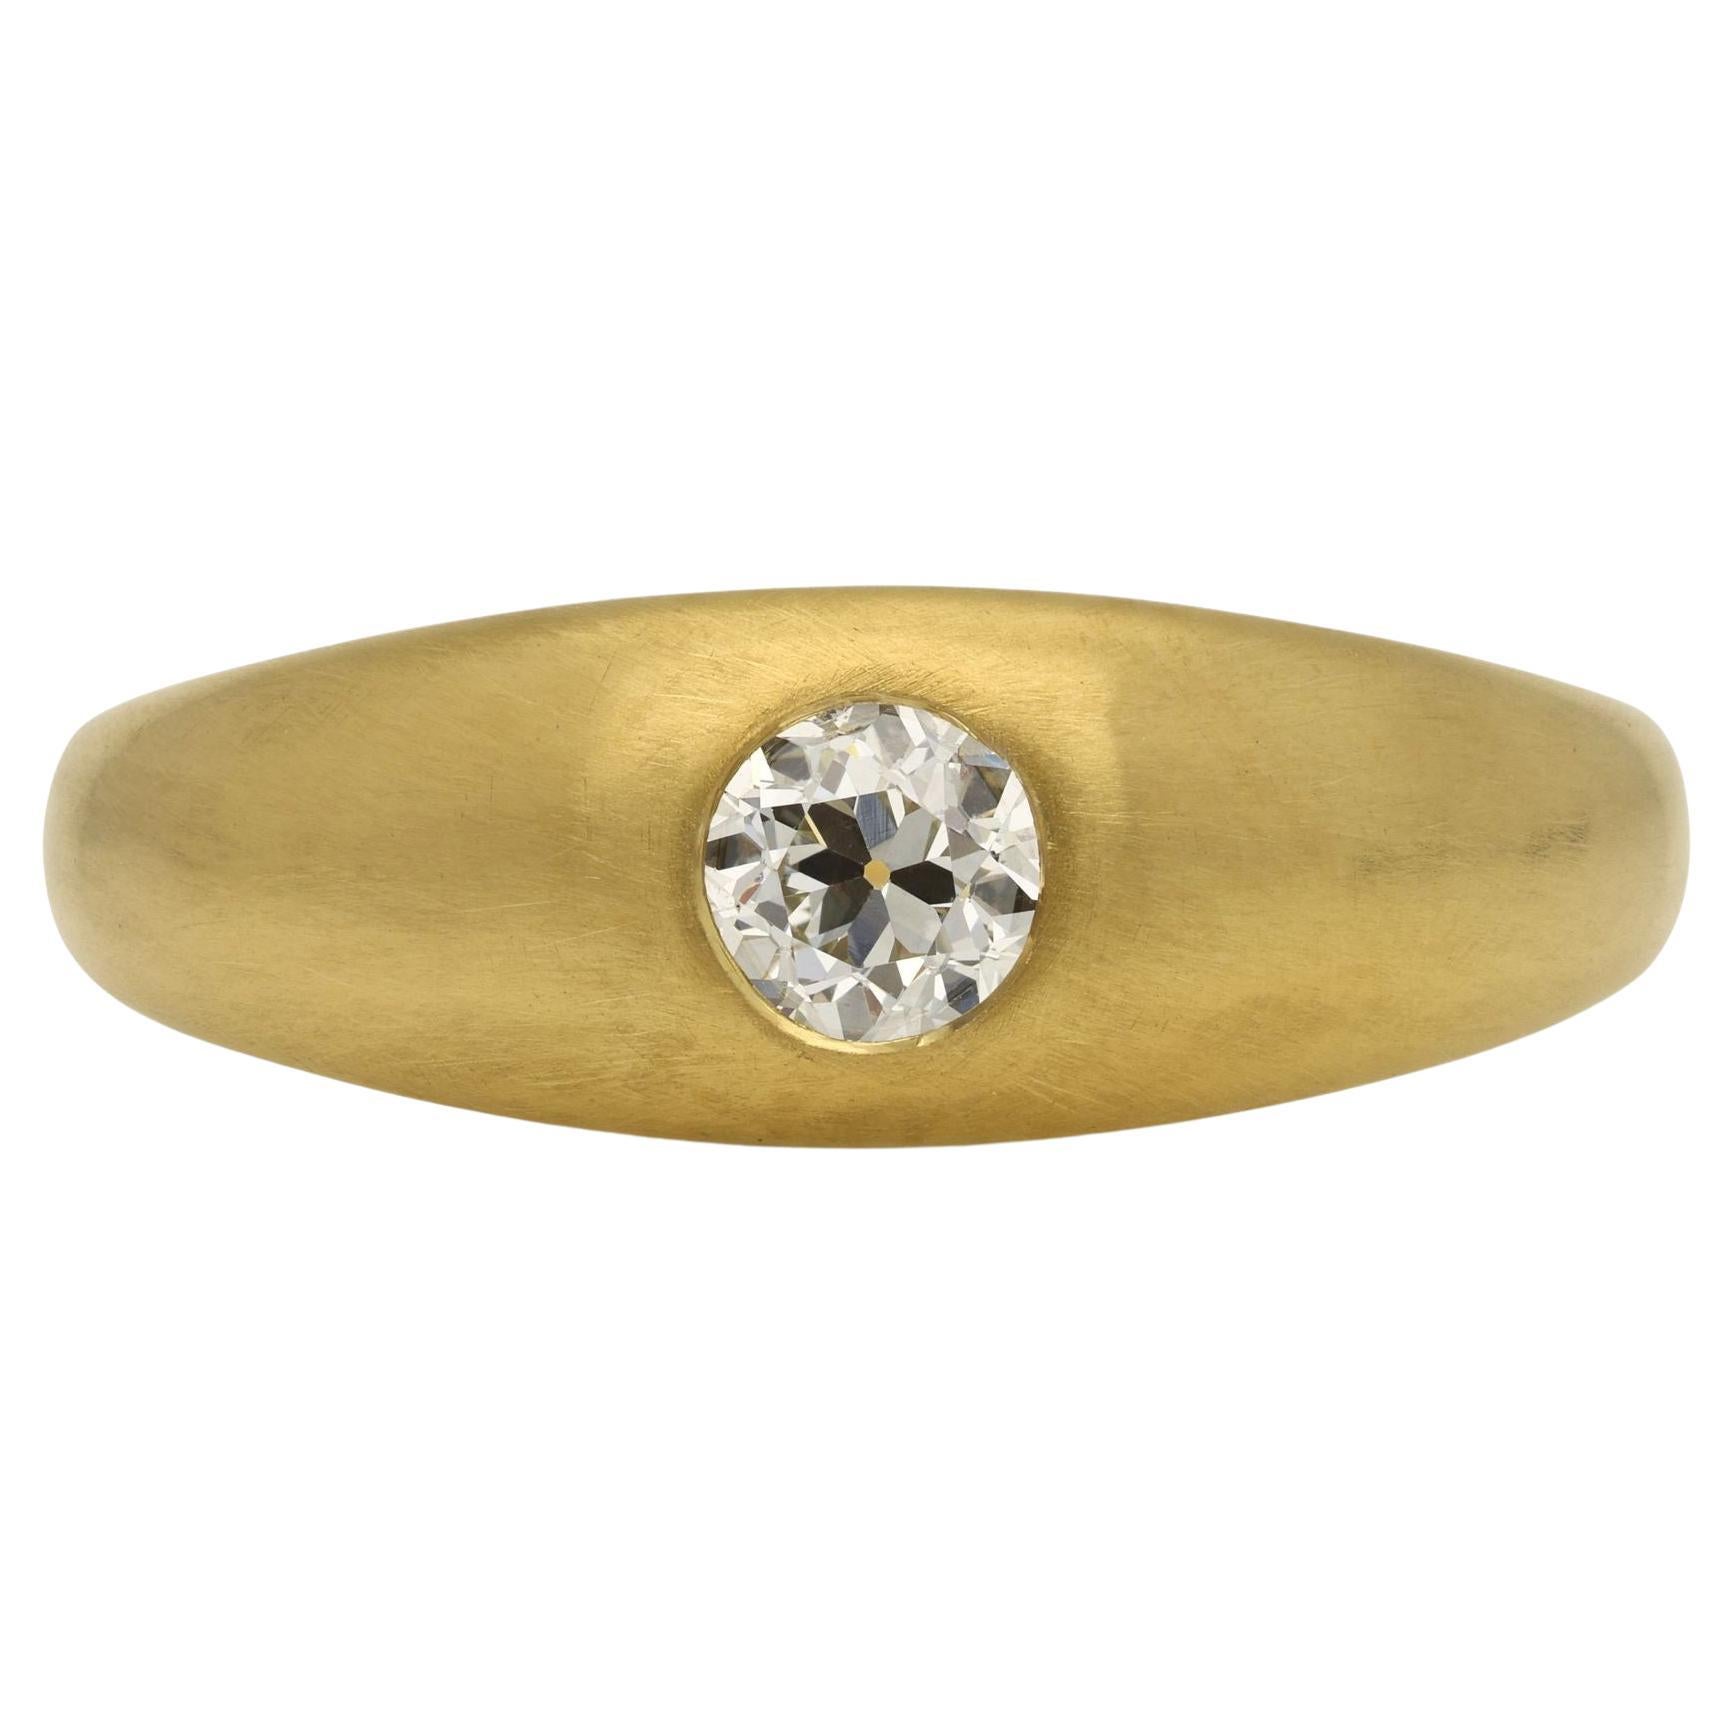 Hancocks Contemporary 0.54ct Old European Cut Diamond And 22ct Gold Band Ring For Sale